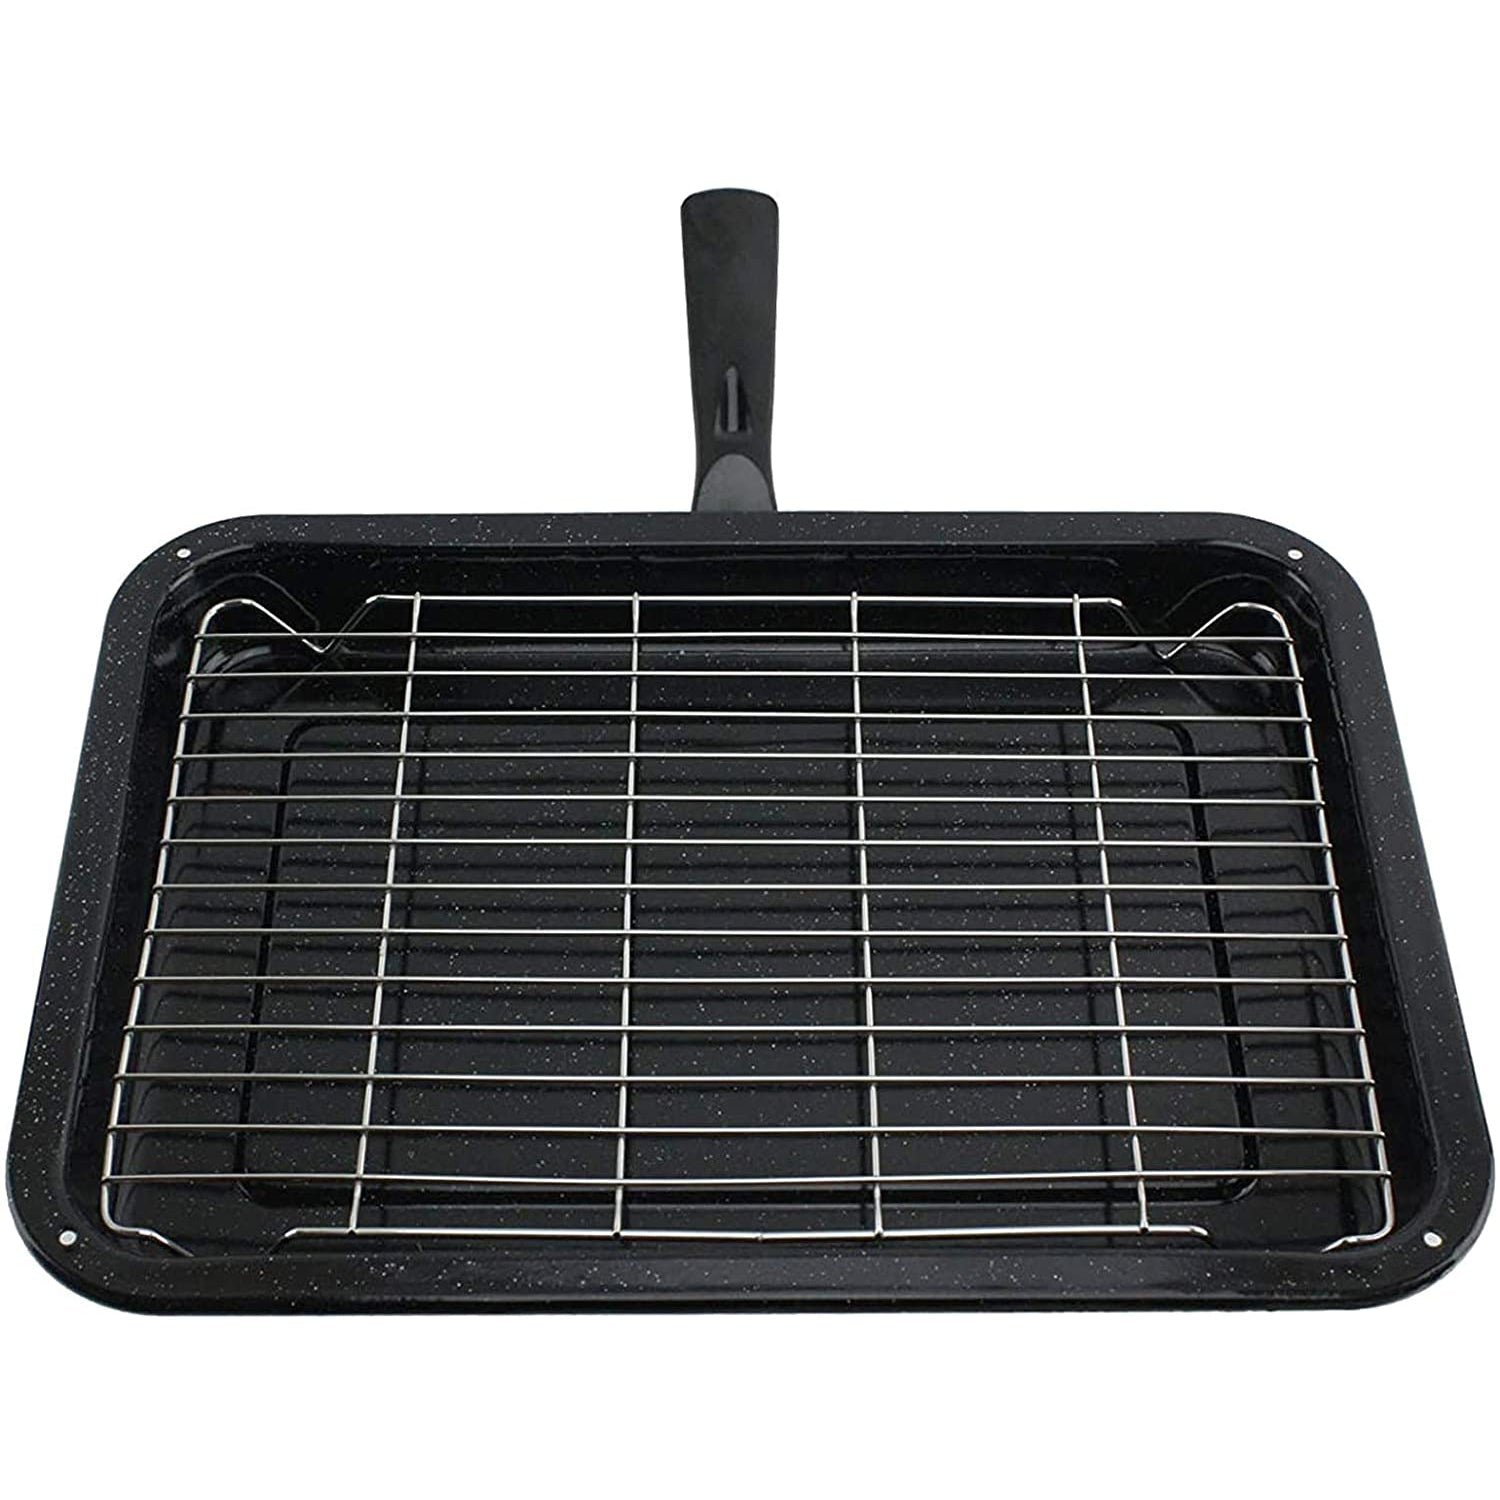 Small Grill Pan + Rack + Detachable Handle for HOTPOINT Oven Cooker